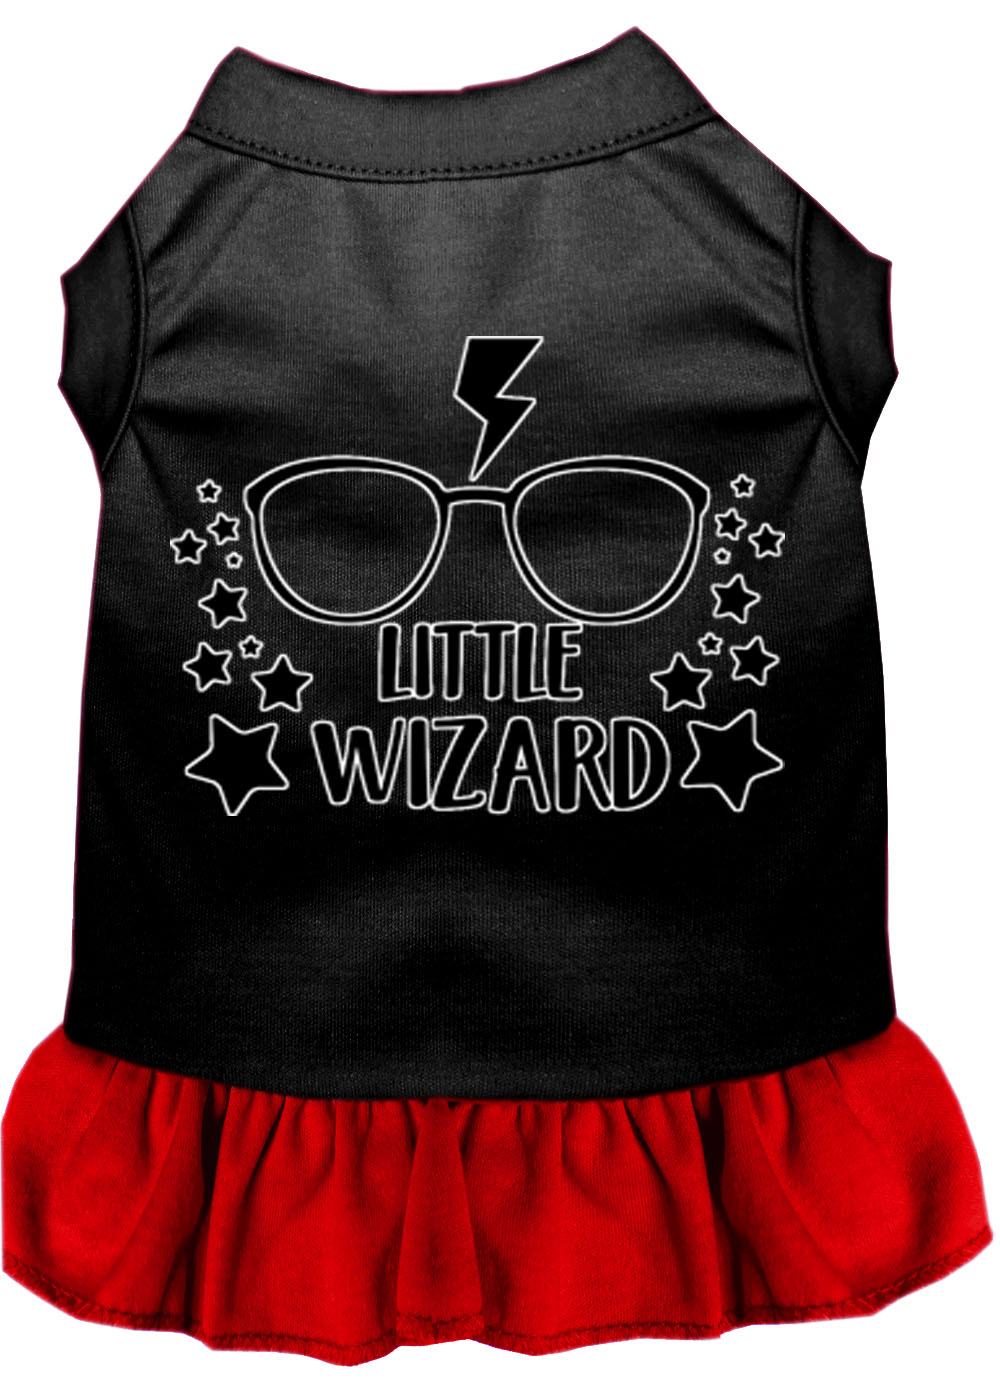 Little Wizard Screen Print Dog Dress Black with Red Lg